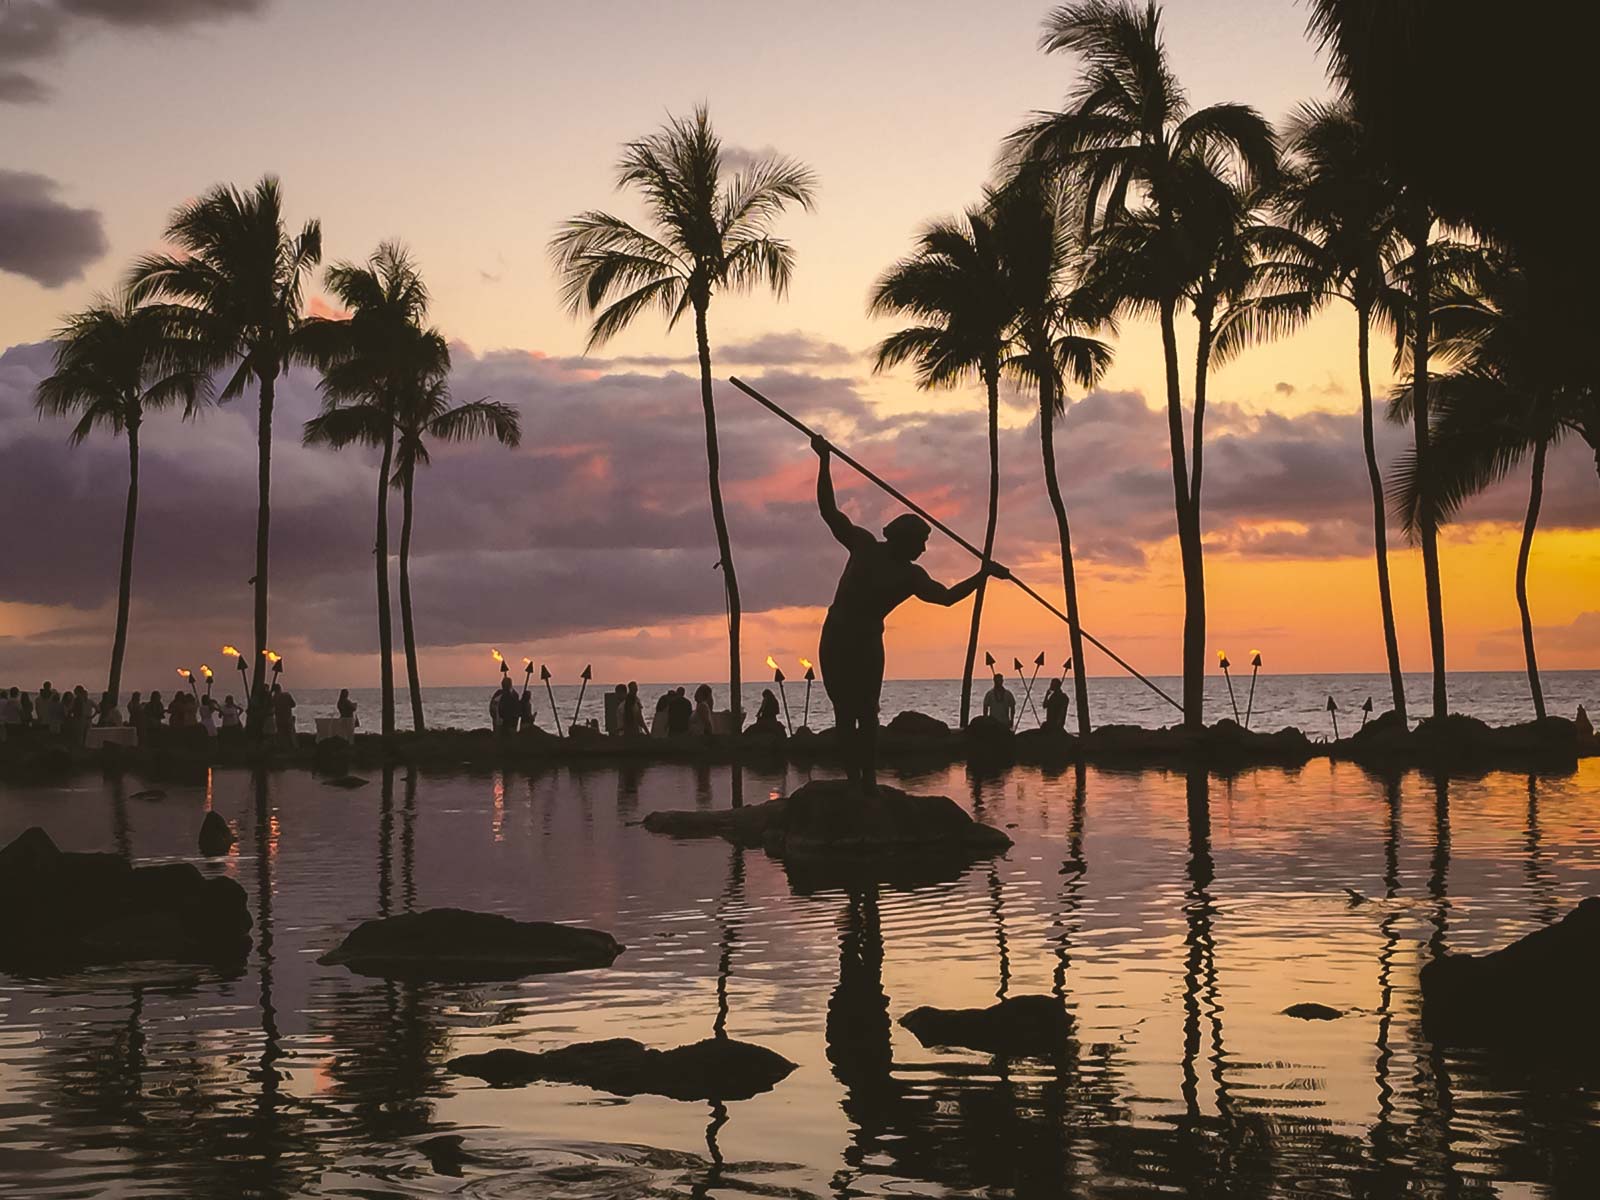 Where to stay in Maui to Save Money